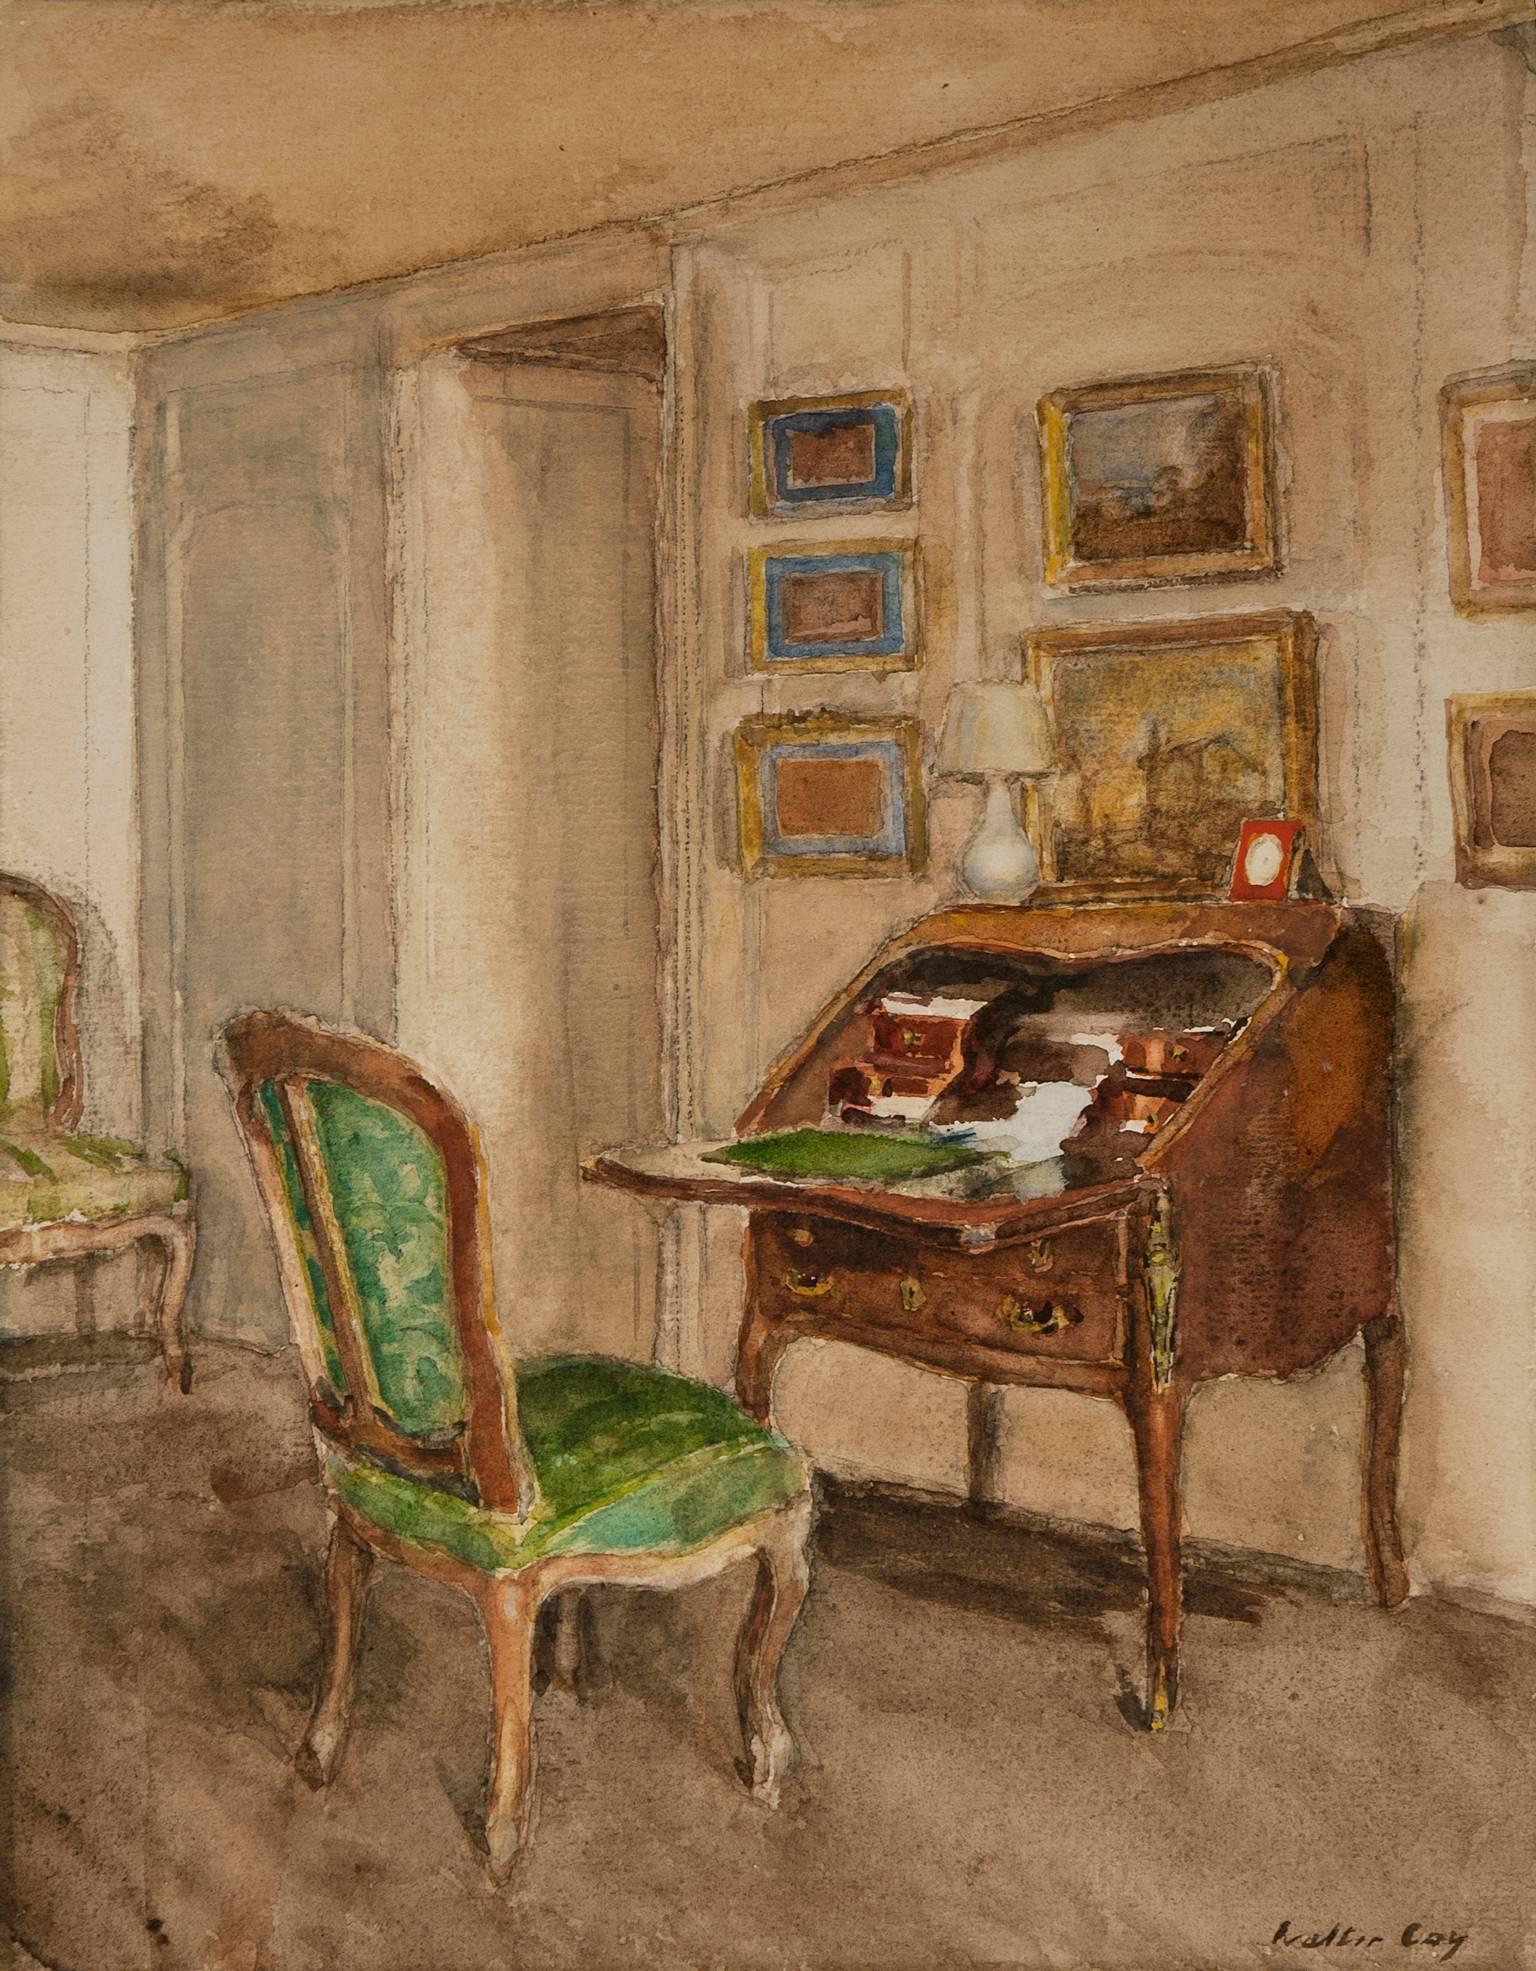 WALTER GAY
American, 1856–1937

The Boudoir, Château du Bréau

Signed Walter Gay
Watercolor on paper
14 x 11 inches (35.6 x 28 cm)
Framed: 19 x 16 inches (48.3 x 40.6 cm)

Provenance
Wadsworth Collection, Geneseo, New York